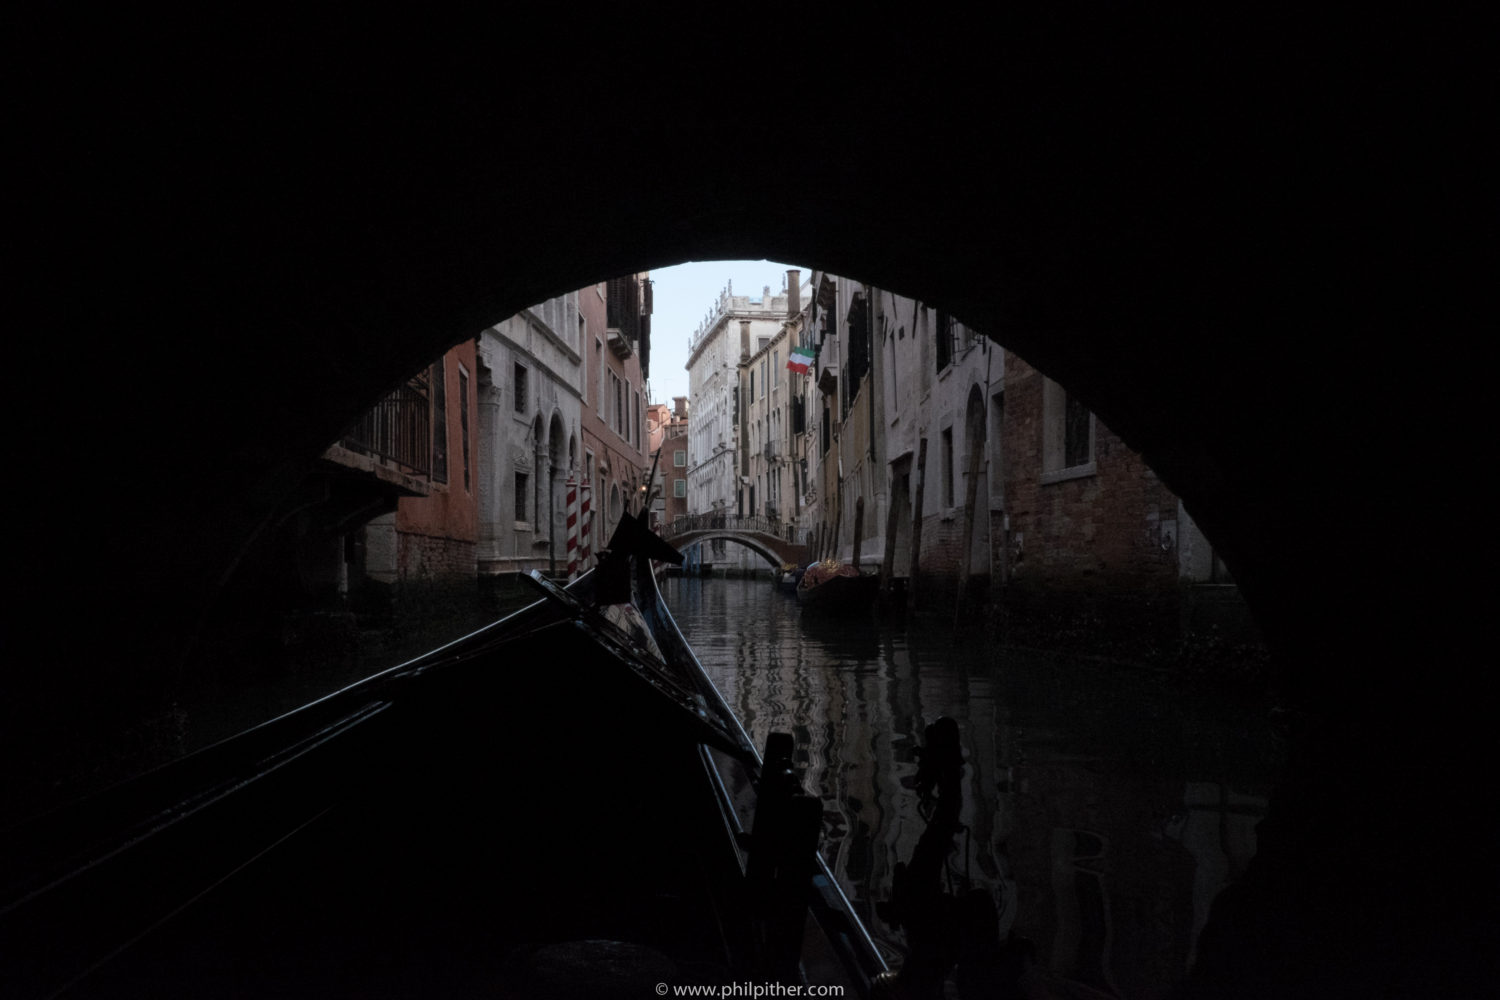 Venice - back streets/canals